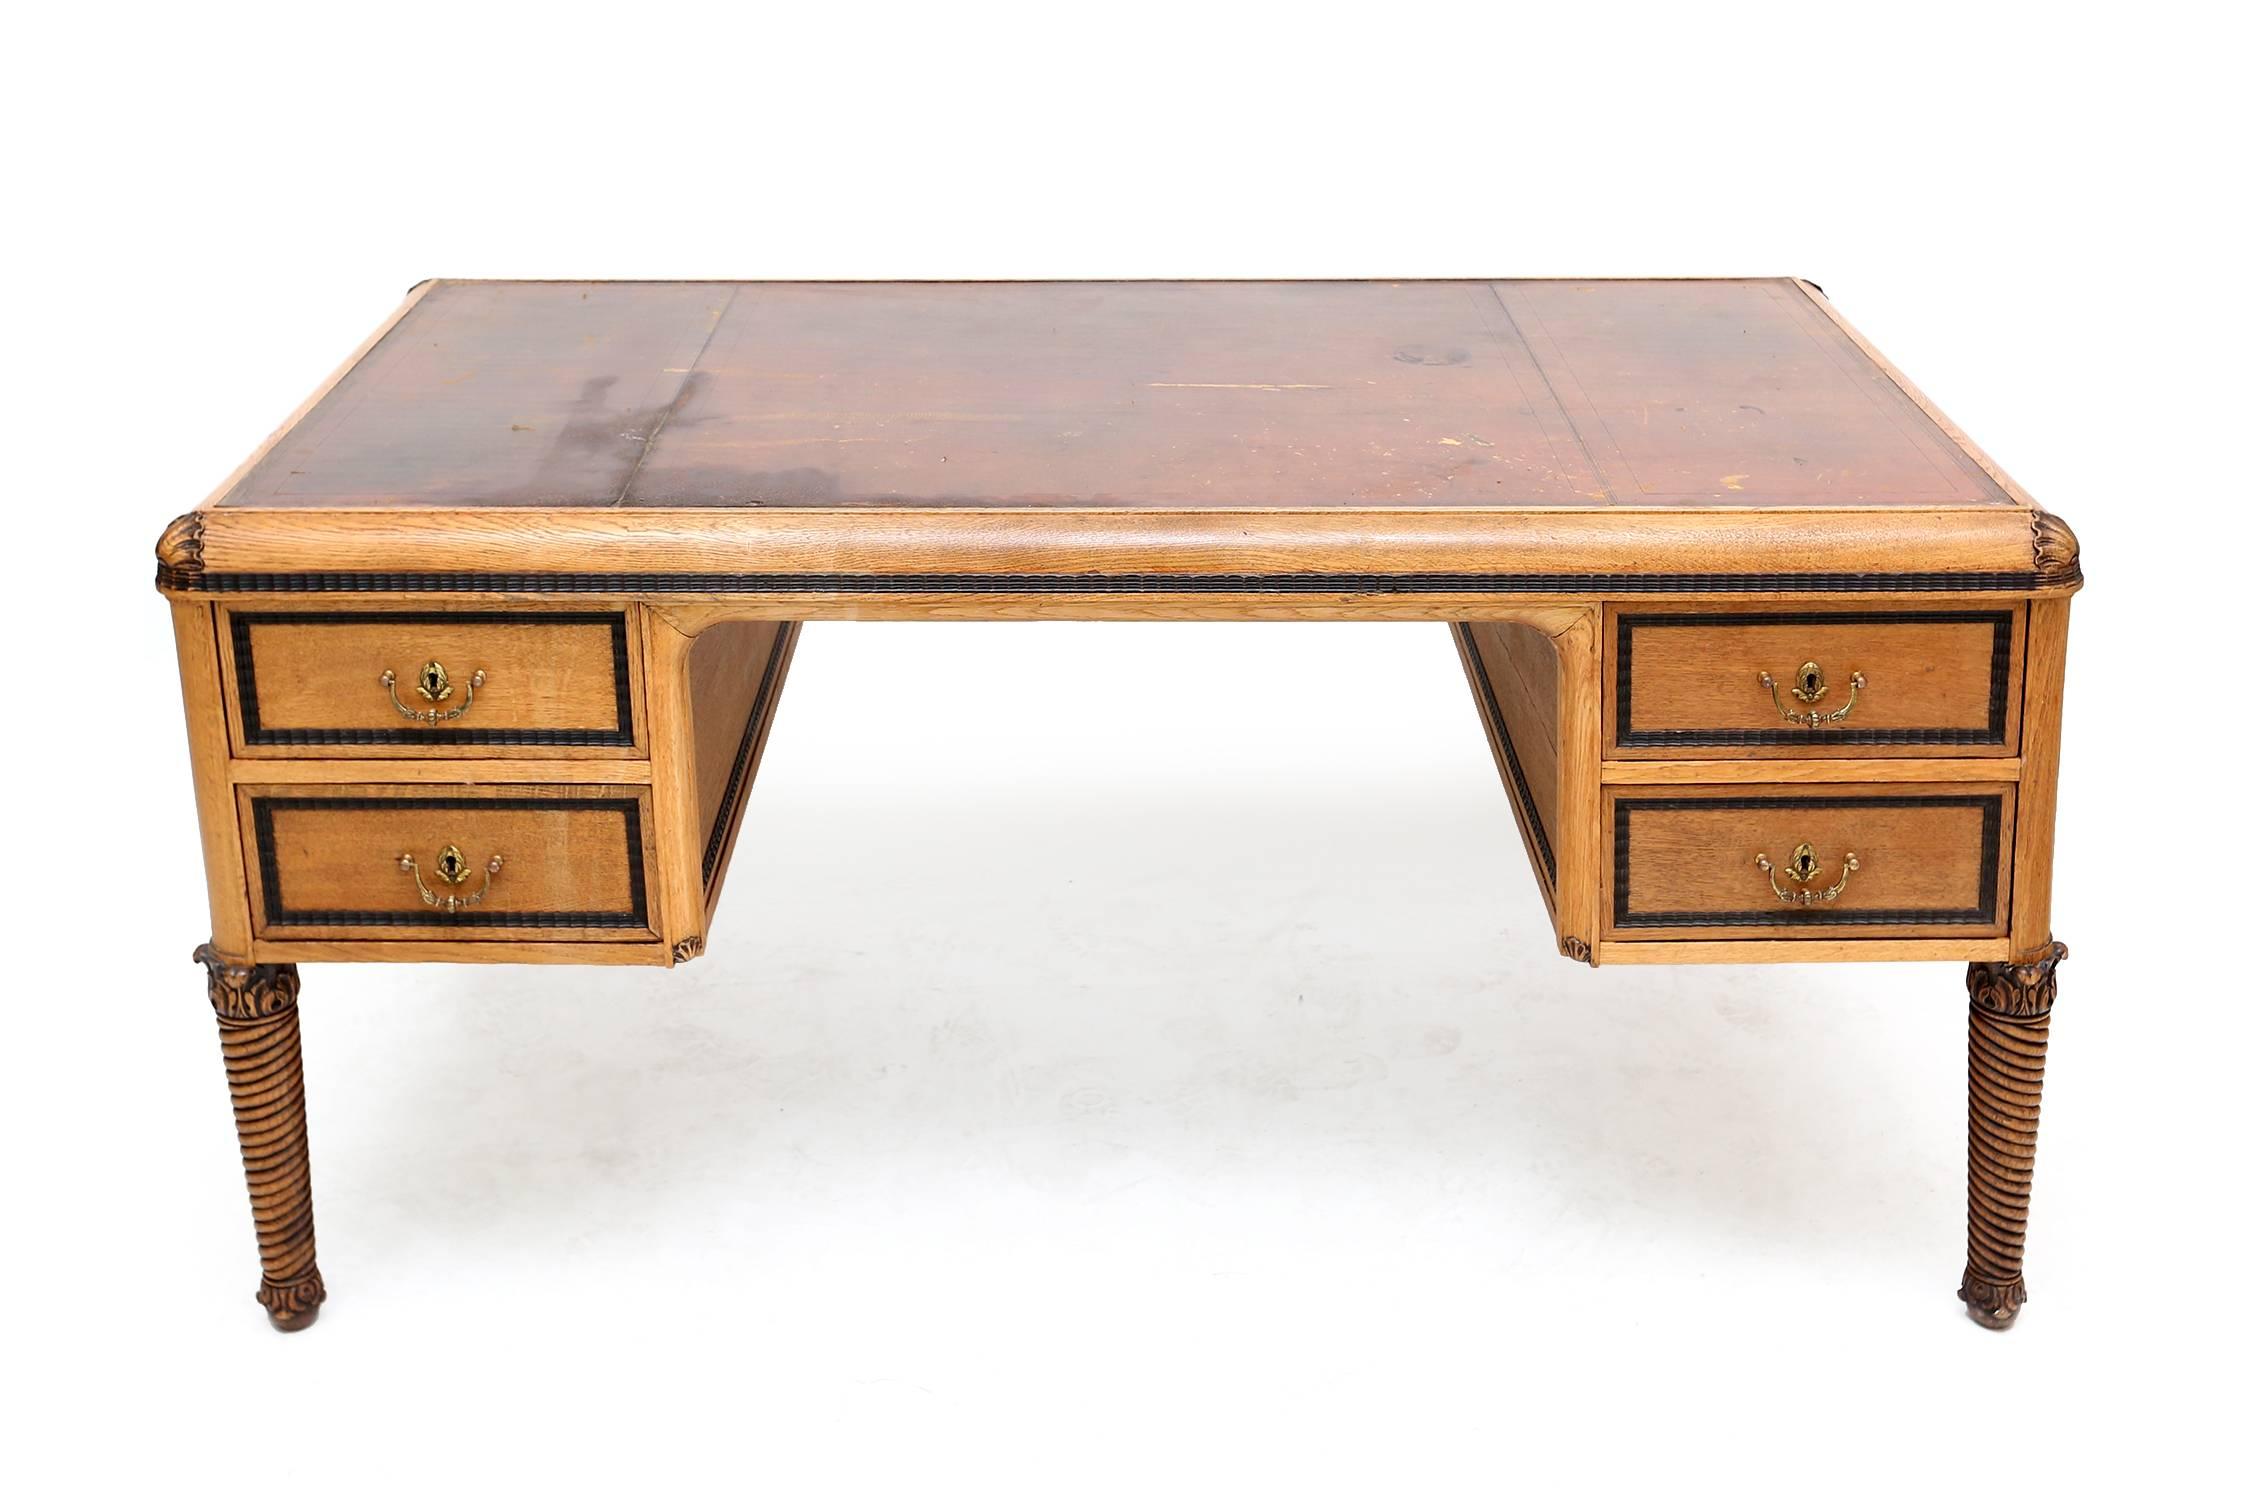 Art Deco 'double face' desk by Maison Franck, Belgium, 1930s

fruitwood, turned legs with acanthus leafs
the desk has two exact fronts
The worn leather top can be changed upon request

Check out our Goldwood storefront for more matching pieces.



 